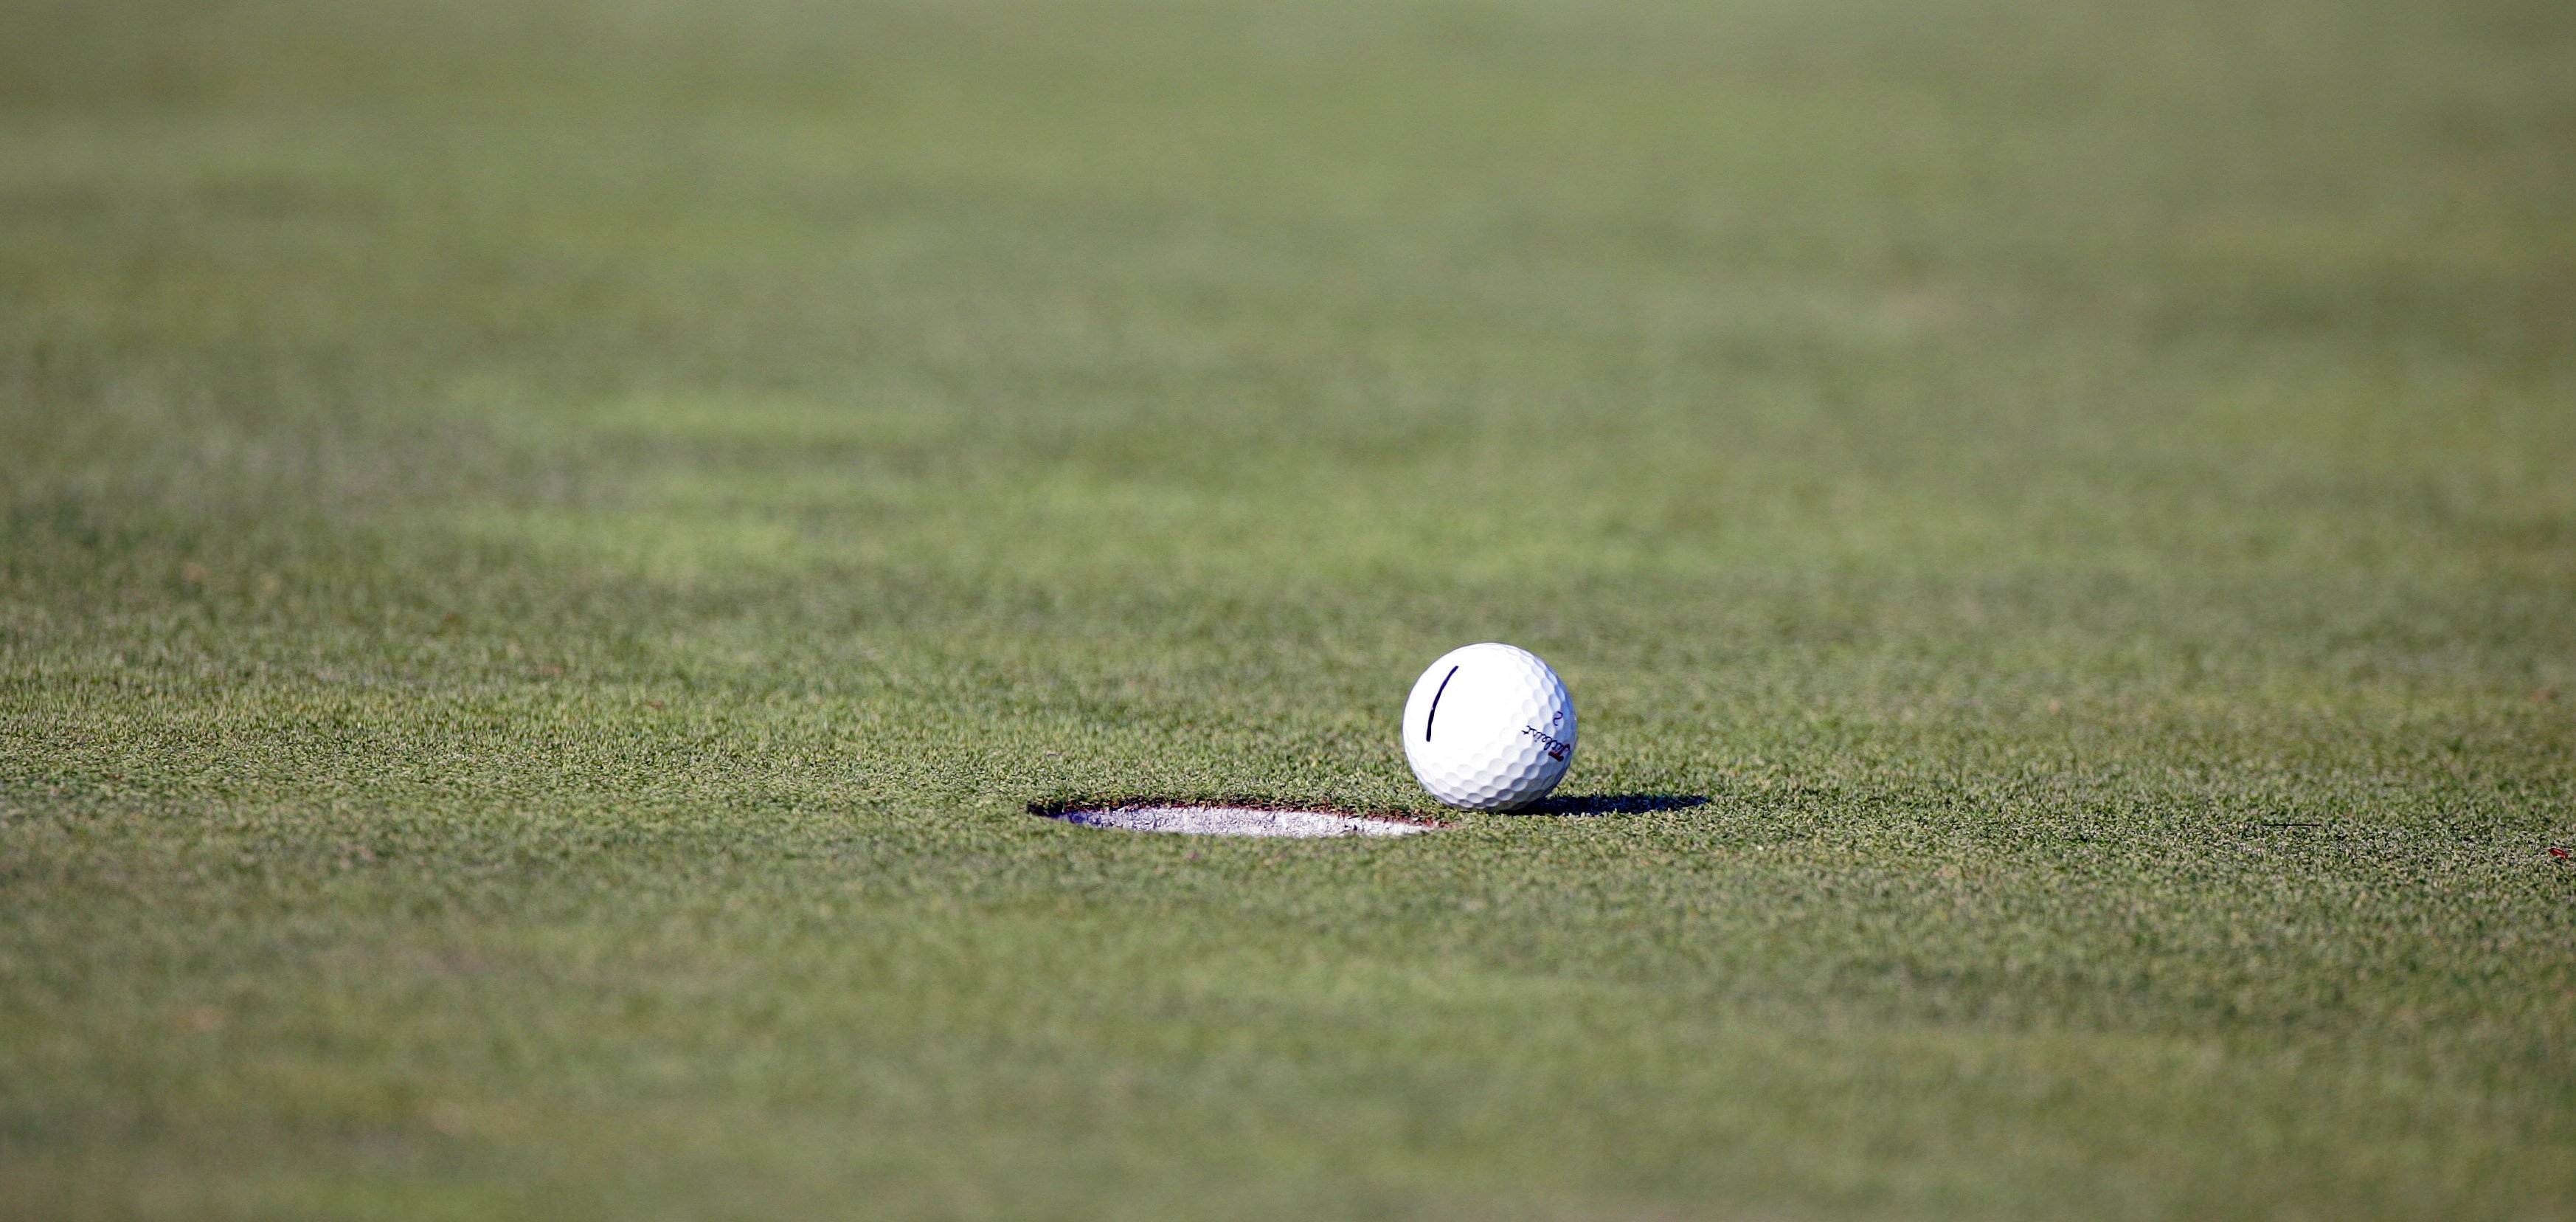 A golf ball falls short of it's target during final round of the 2005 Bell Canadian Open, September 11, 2005 at Shaughnessy Golf & Country Club, Vancouver | Photo: Getty Images